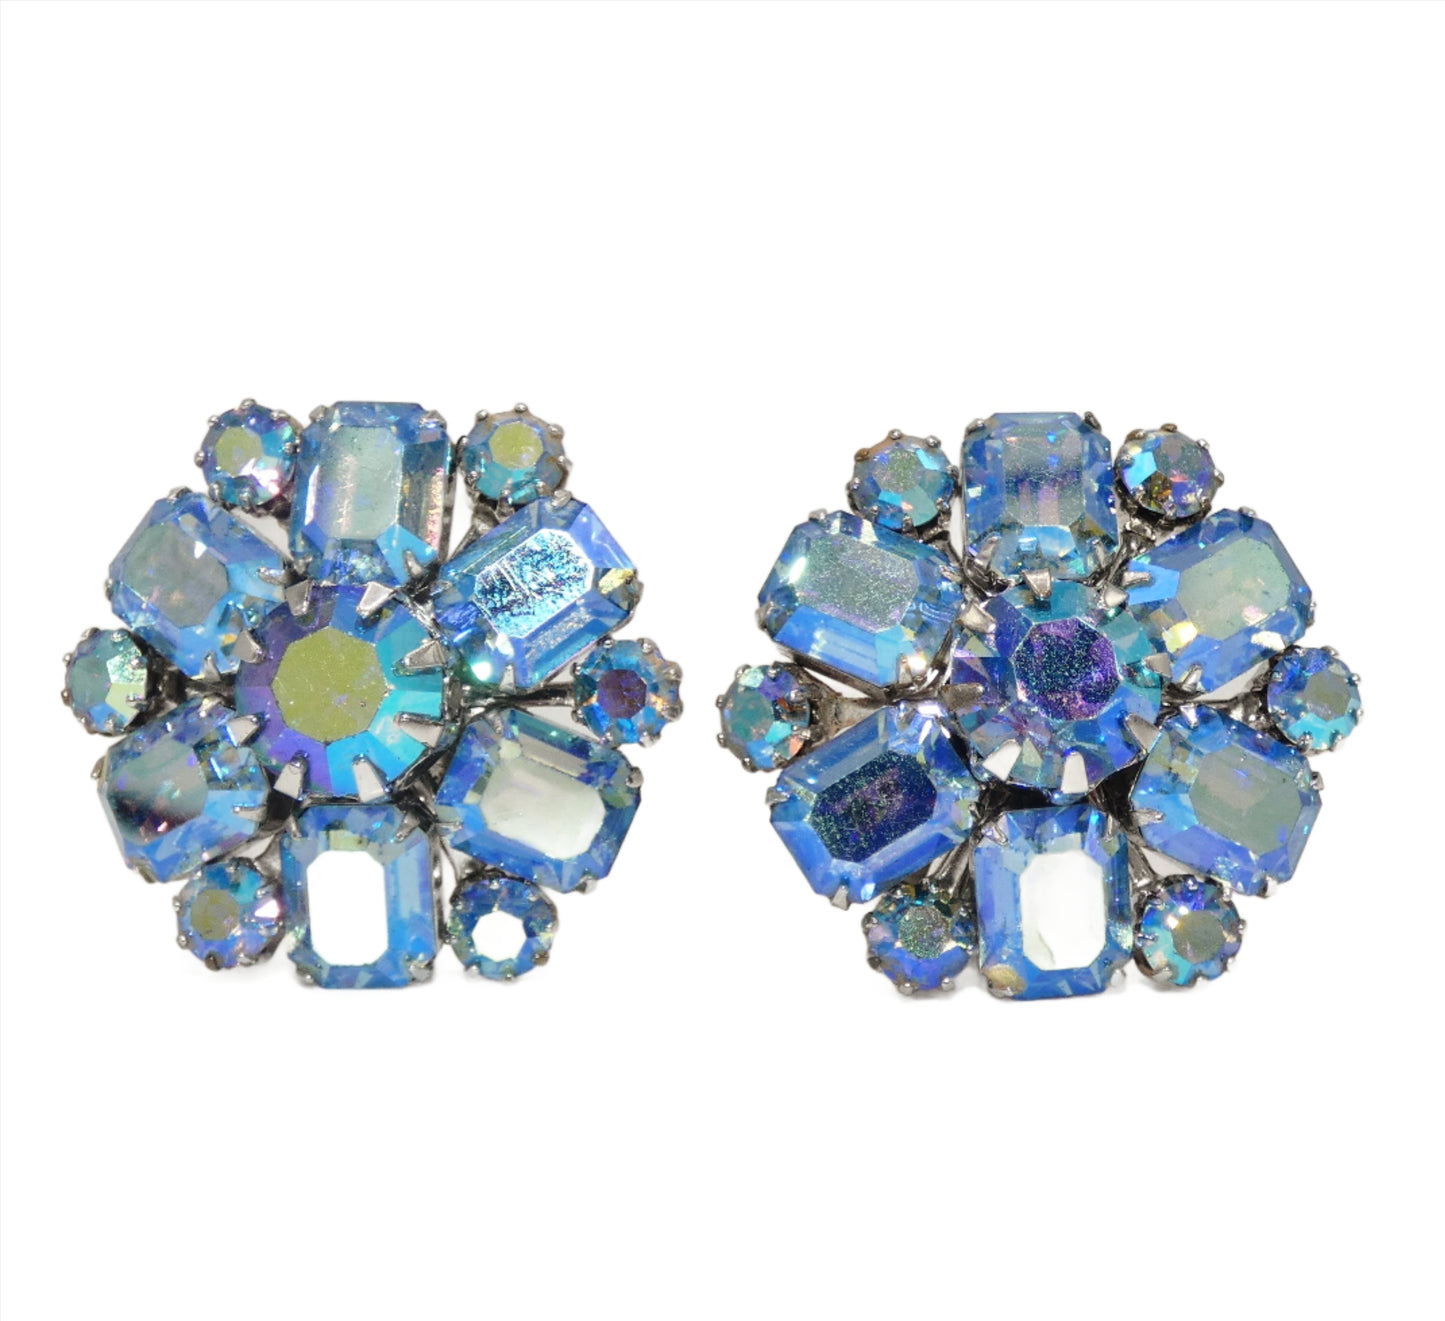 Weiss Glass and Rhinestone Clip On Earrings